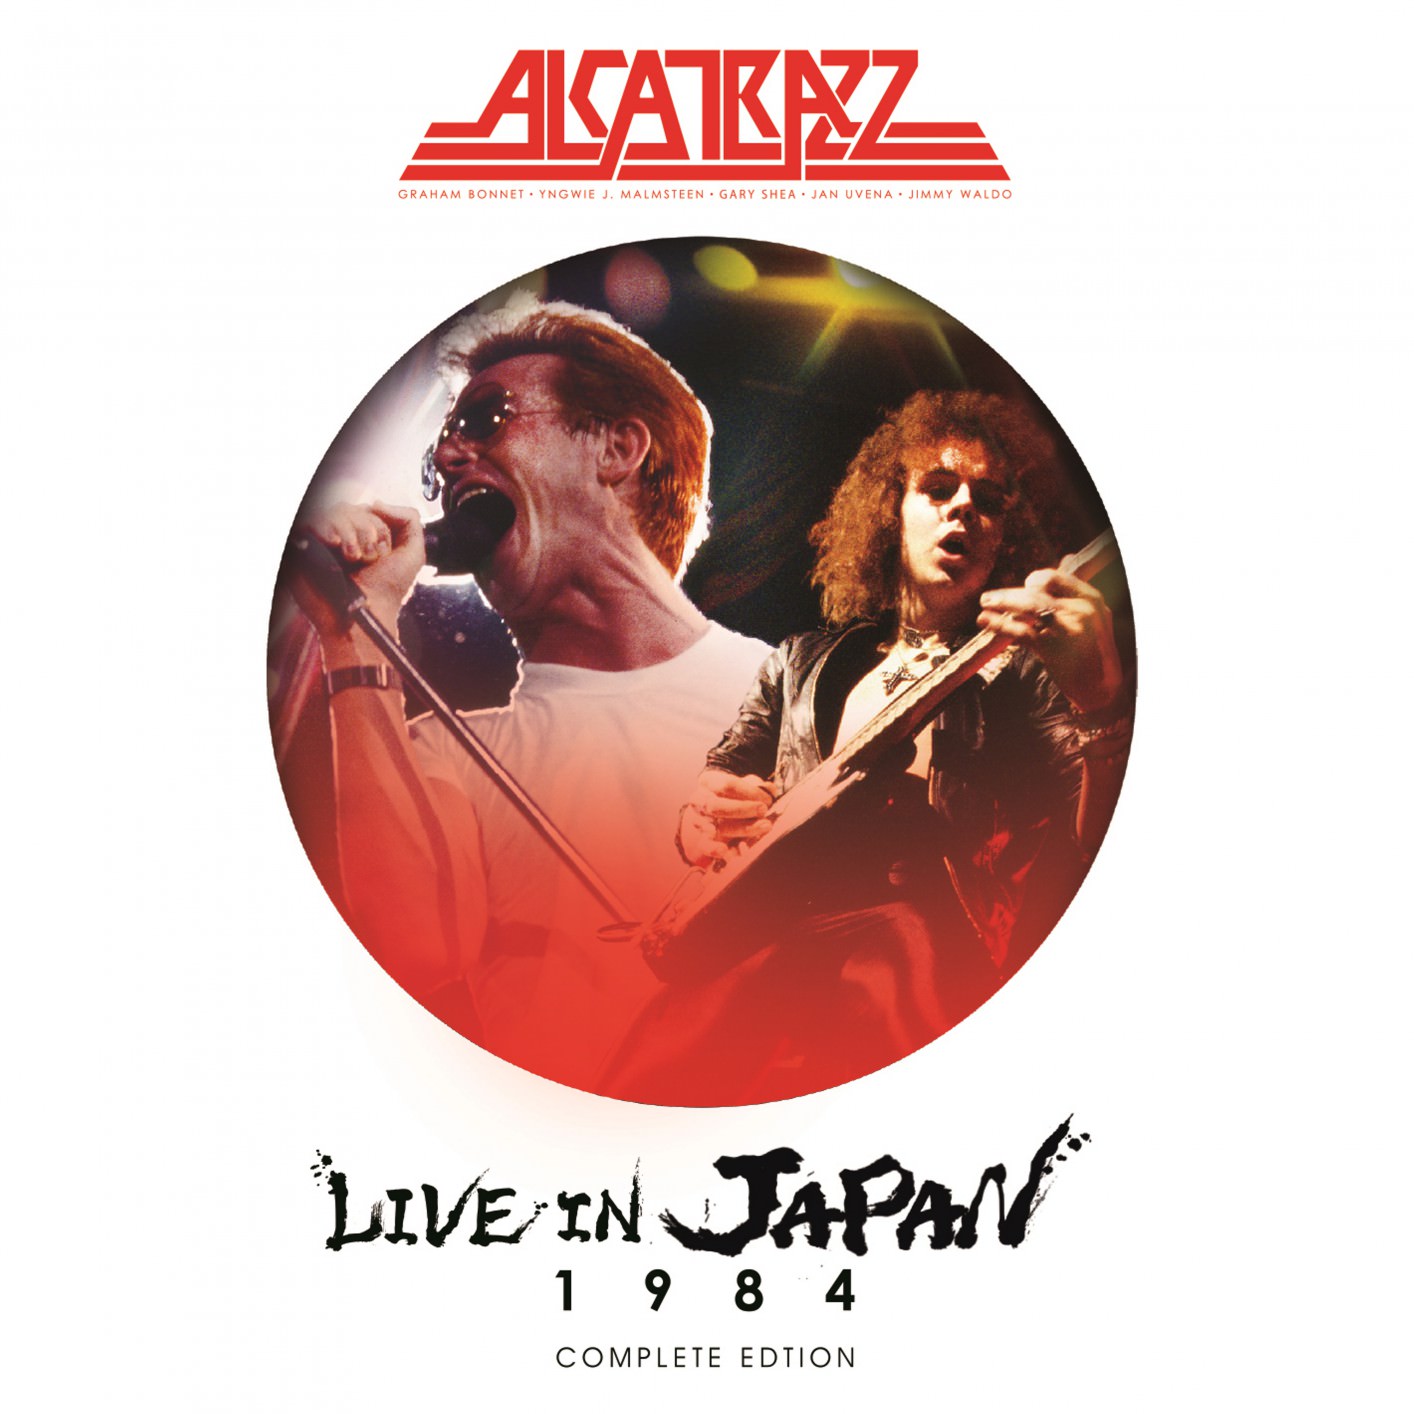 Alcatrazz – Live in Japan 1984 – Complete Edition (2018) [FLAC 24bit/96kHz]